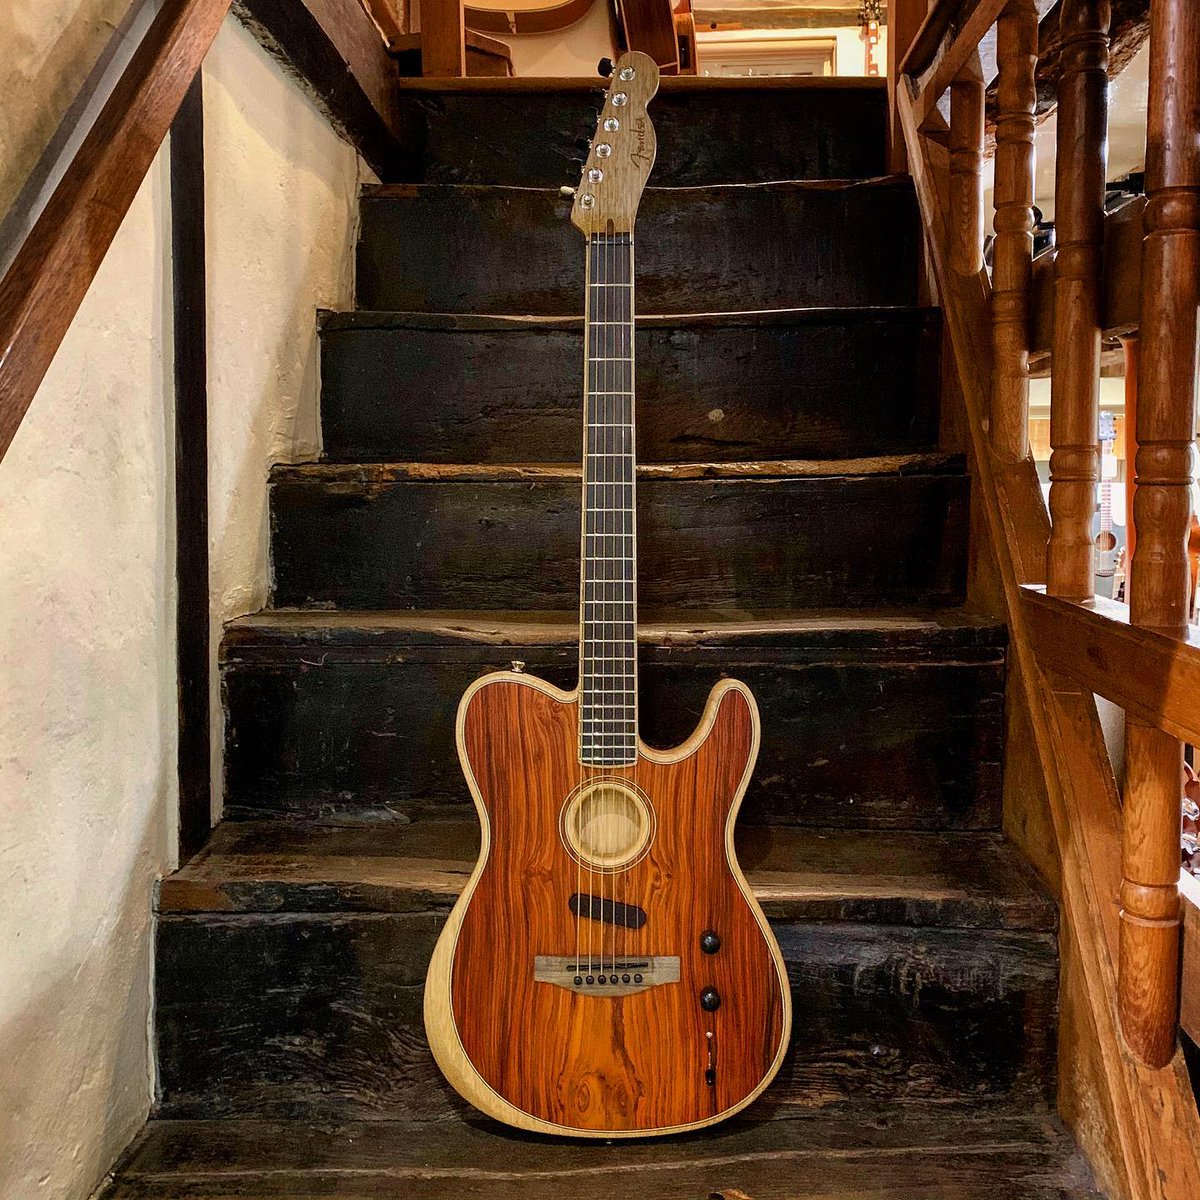 How stunning is this Fender​ Acoustasonic Telecaster Exotic Cocobolo?! Perfect for those gigs when you need both electric and acoustic tones! 👍🏻 

#fender #acoustasonic #telecaster #cocobolo #guitarporn #guitarchat #guitarvillage #guitaroftheday

>>>bit.ly/33nRfVV<<<